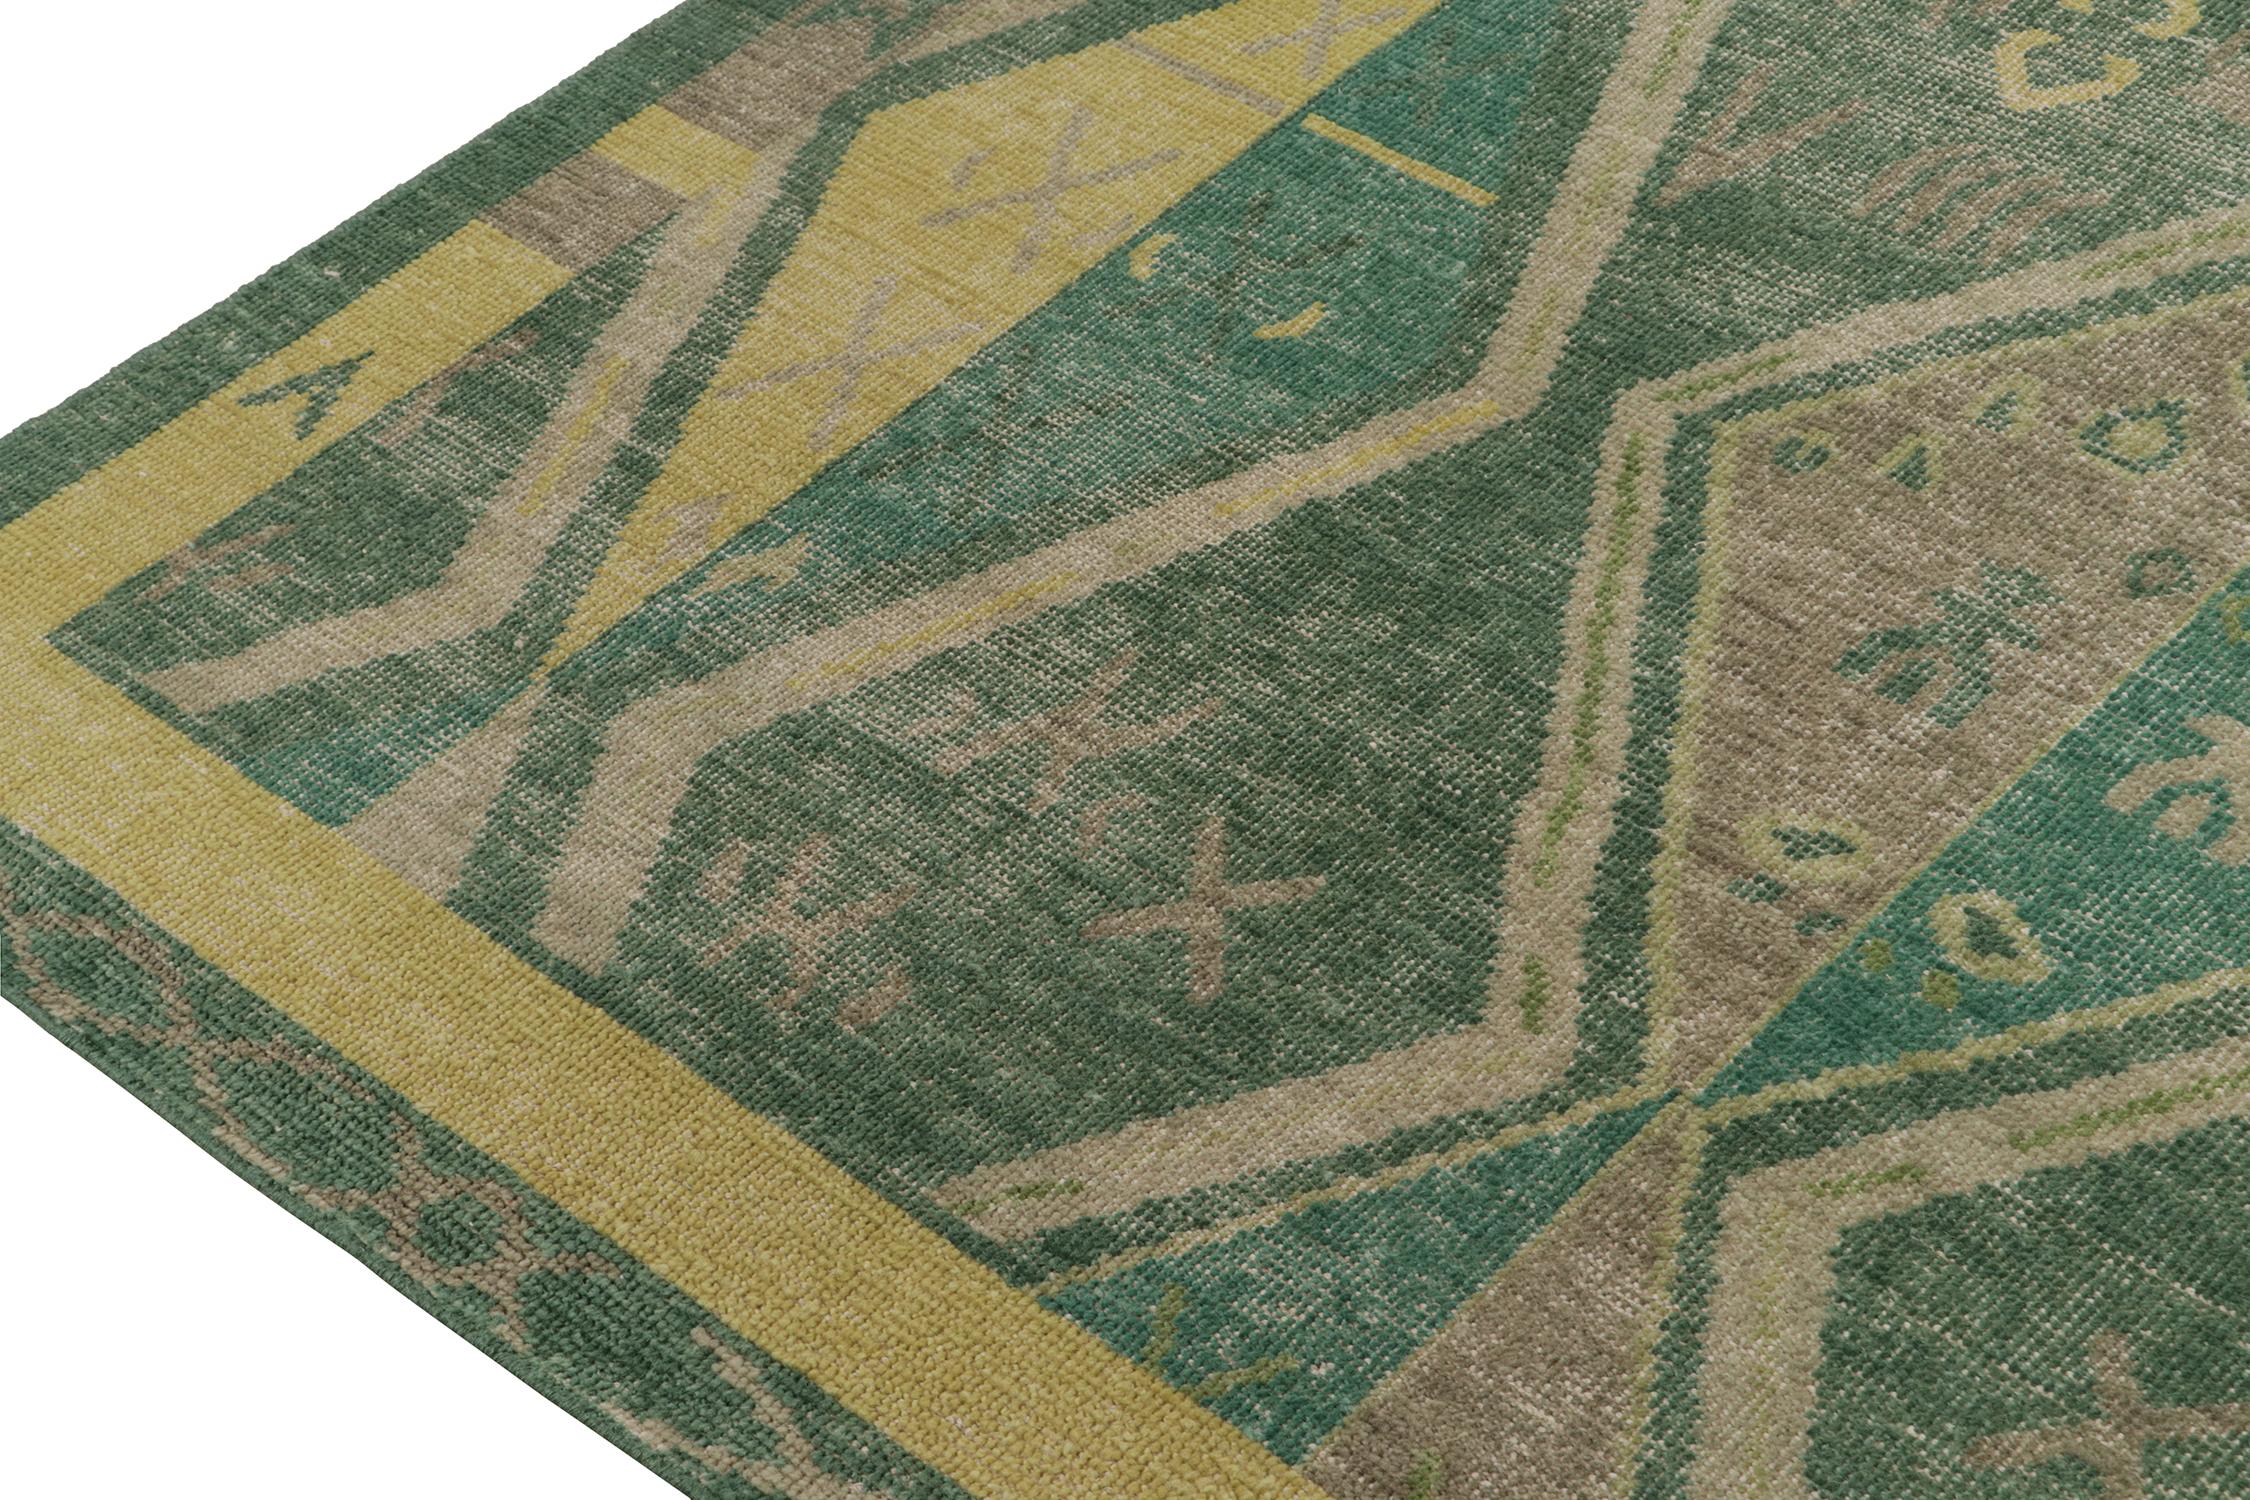 Rug & Kilim’s Distressed Style Rug in Green & Brown Geometric Patterns In New Condition For Sale In Long Island City, NY